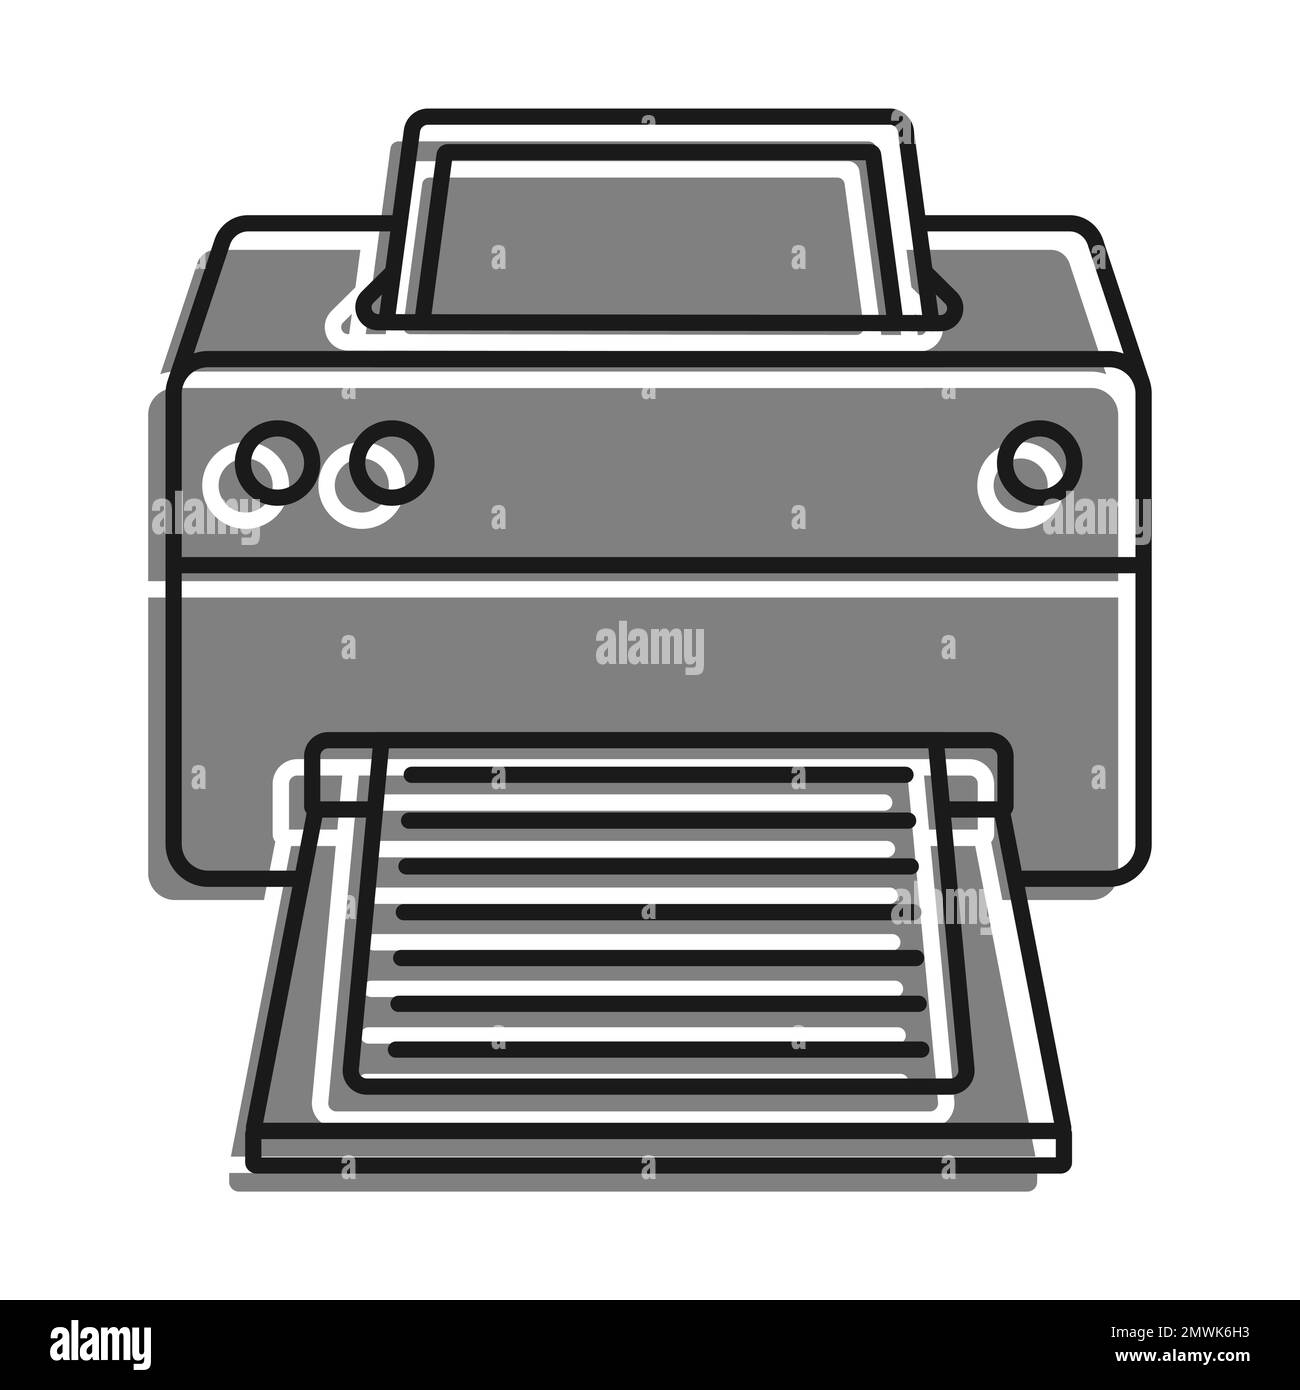 Linear filled with gray color icon. Inkjet Printer Perspective Front View. Printing Documents In Office Using Copiers. Simple black and white vector O Stock Vector